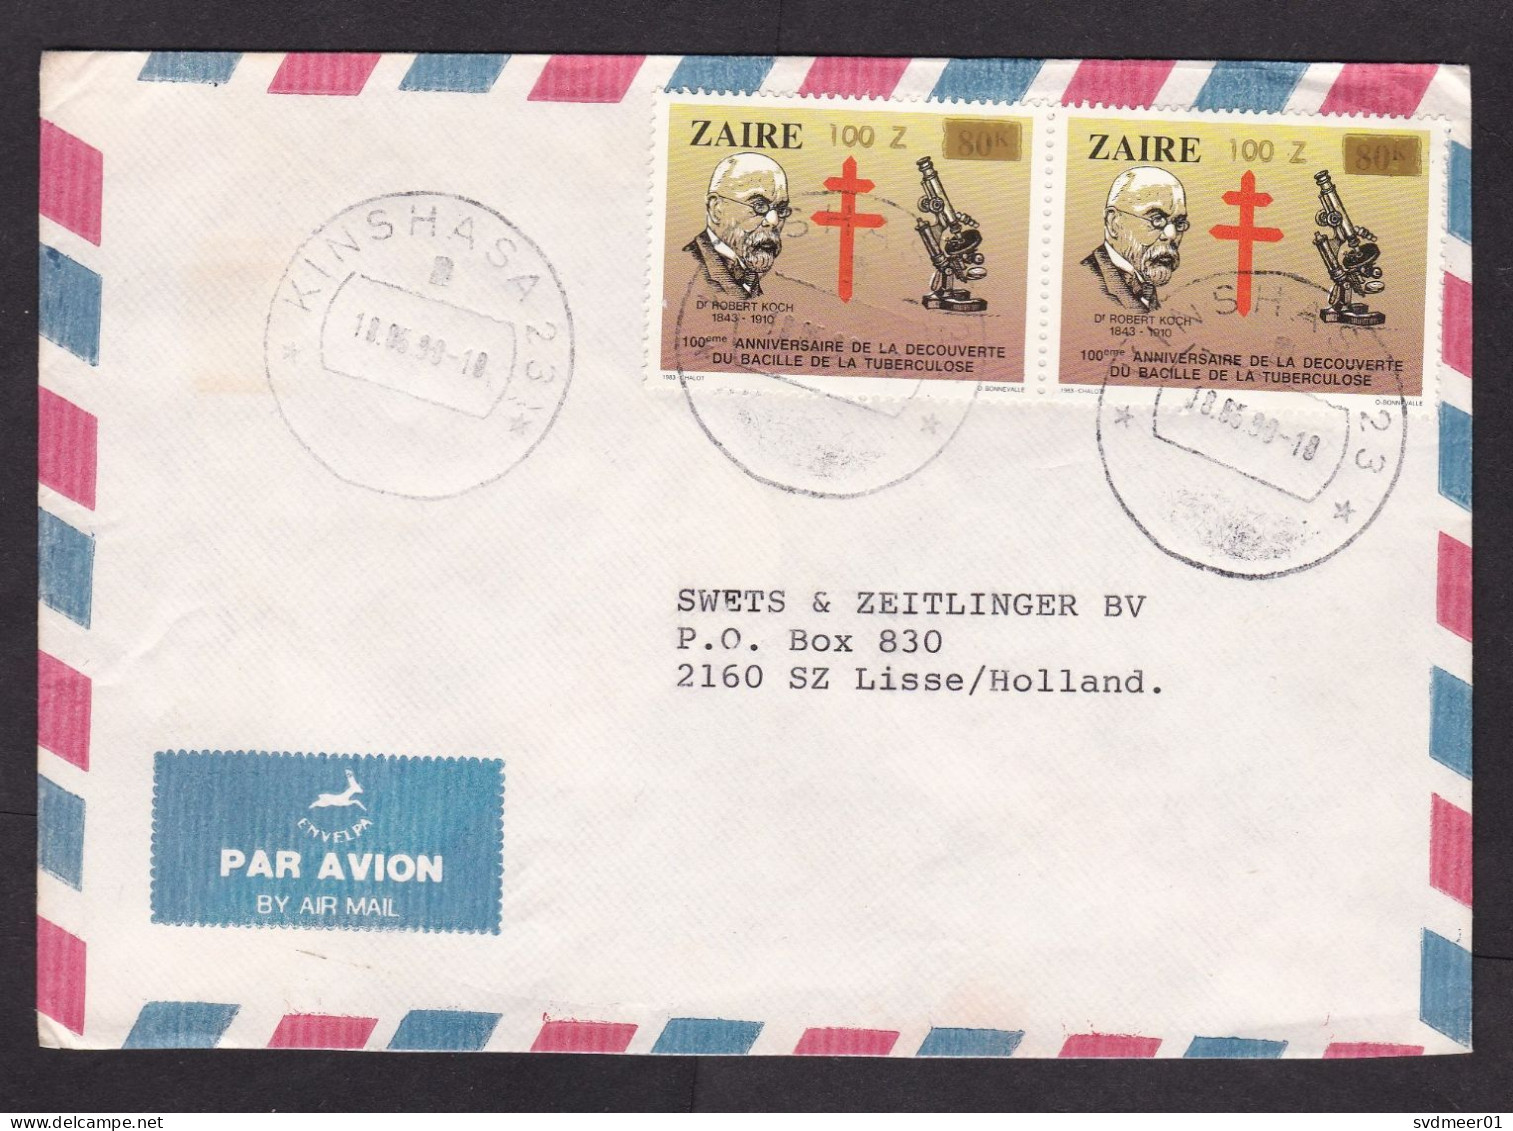 Zaire: Airmail Cover To Netherlands, 1990, 2 Stamps, Koch, TB, Microscope, Value Overprint, Inflation (traces Of Use) - Briefe U. Dokumente